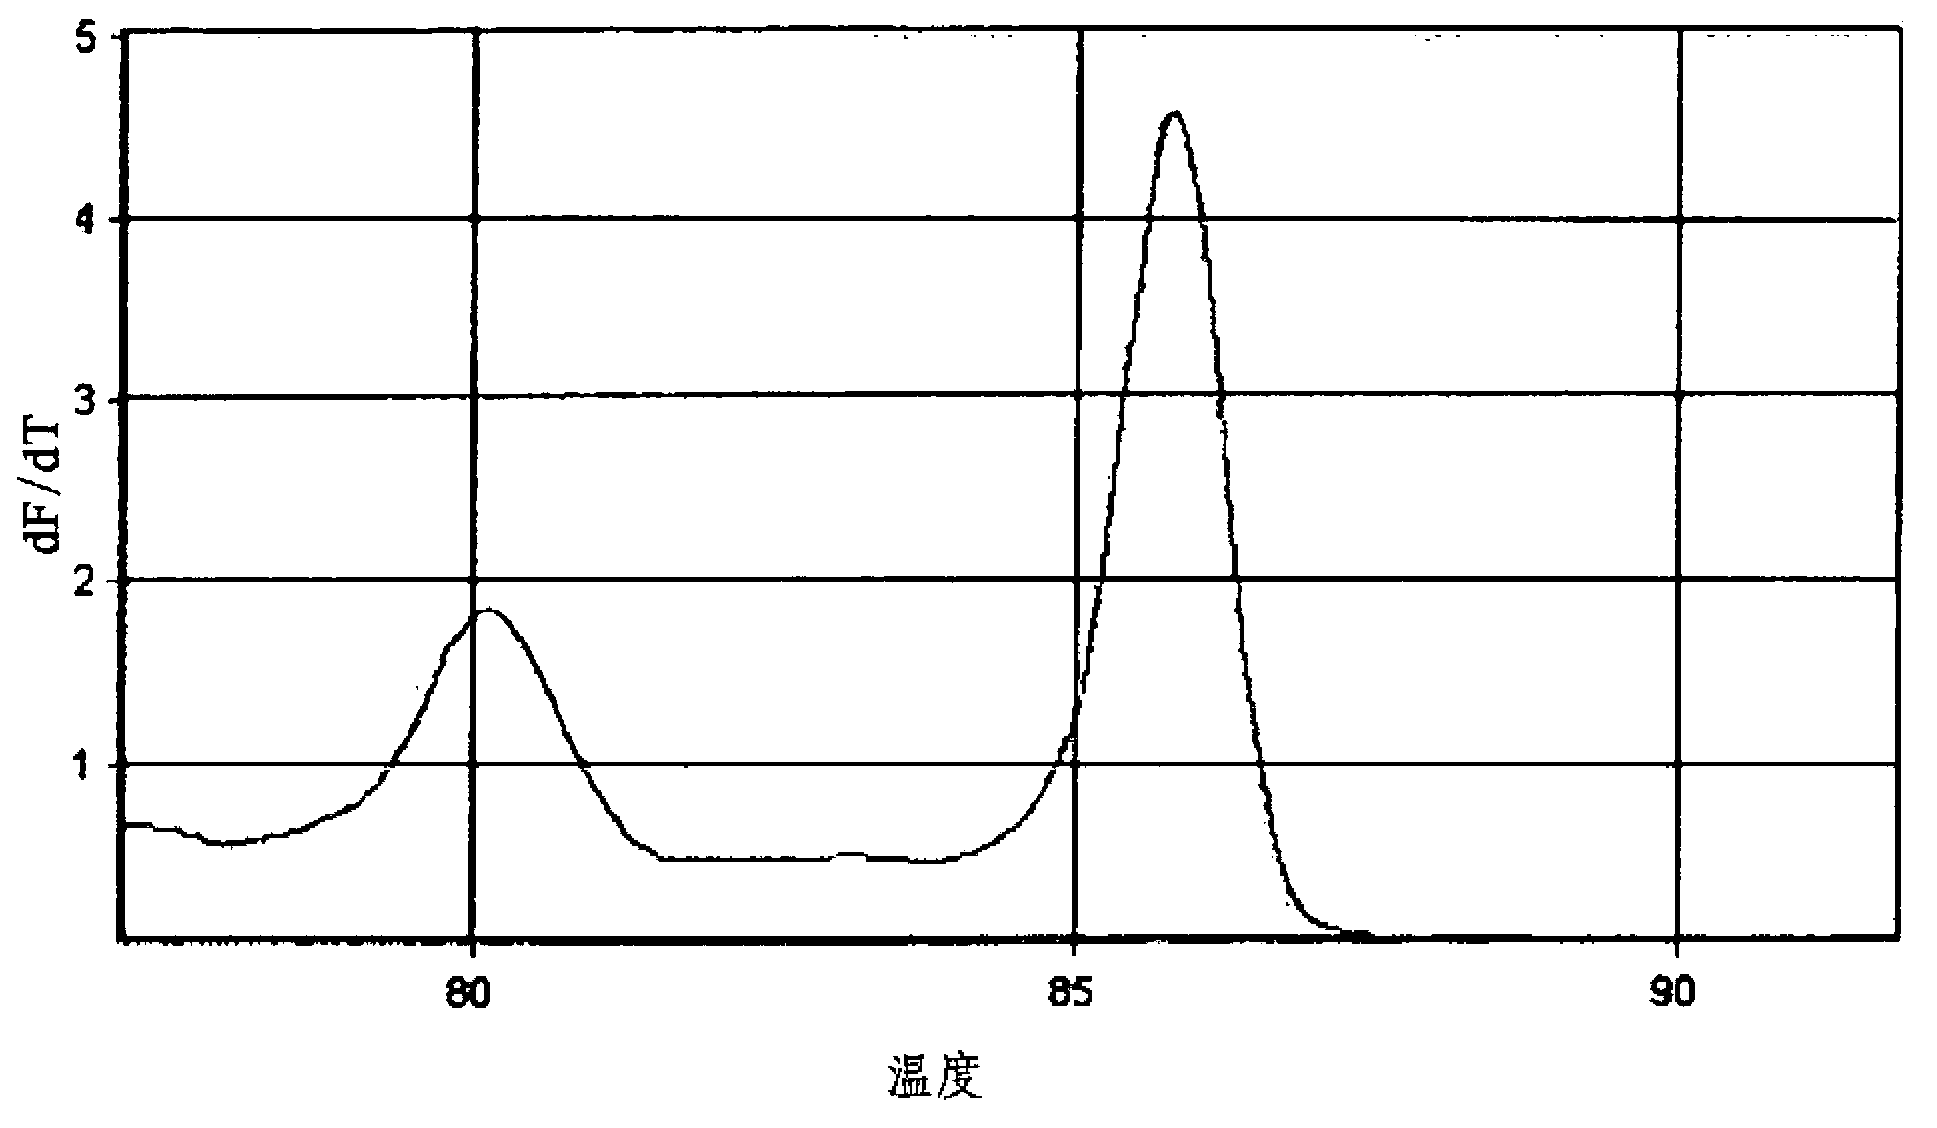 Method for detecting mycobacterium tuberculosis and nontuberculous mycobacteria using duplex real-time polymerase chain reaction and melting curve analysis